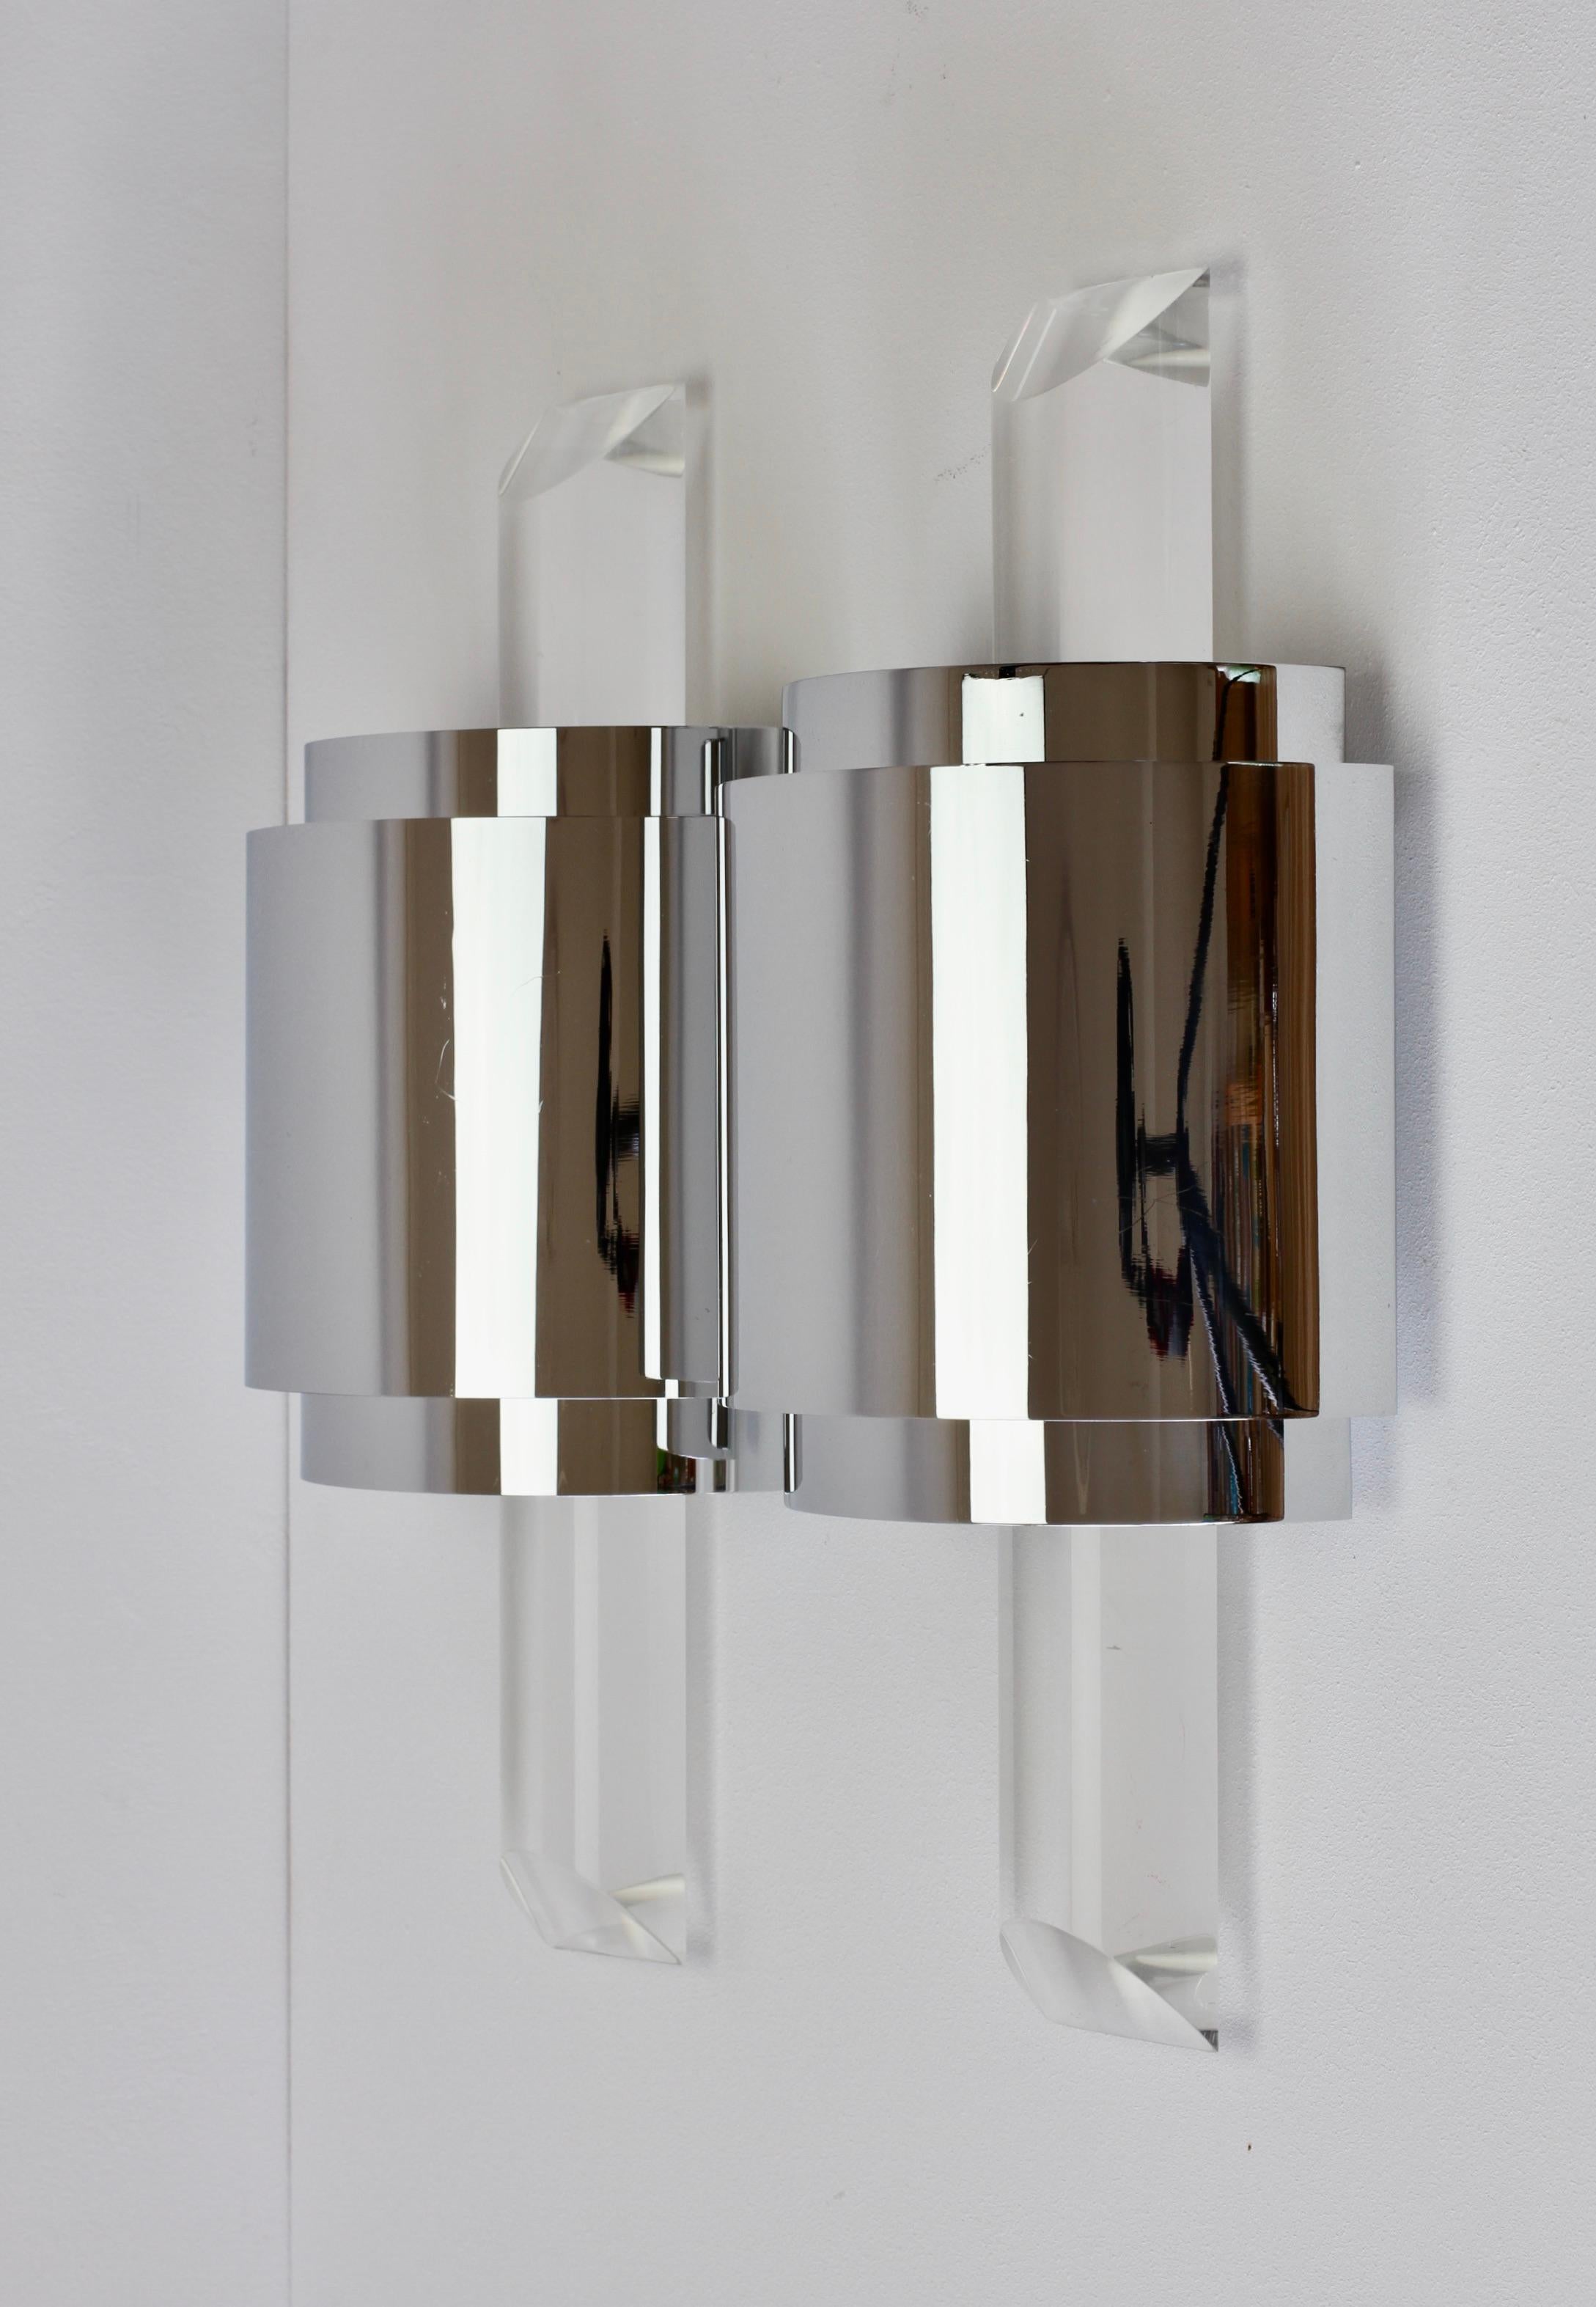 Large Hollywood Regency Lucite and Chrome Wall Lights or Sconces, circa 1970s For Sale 4